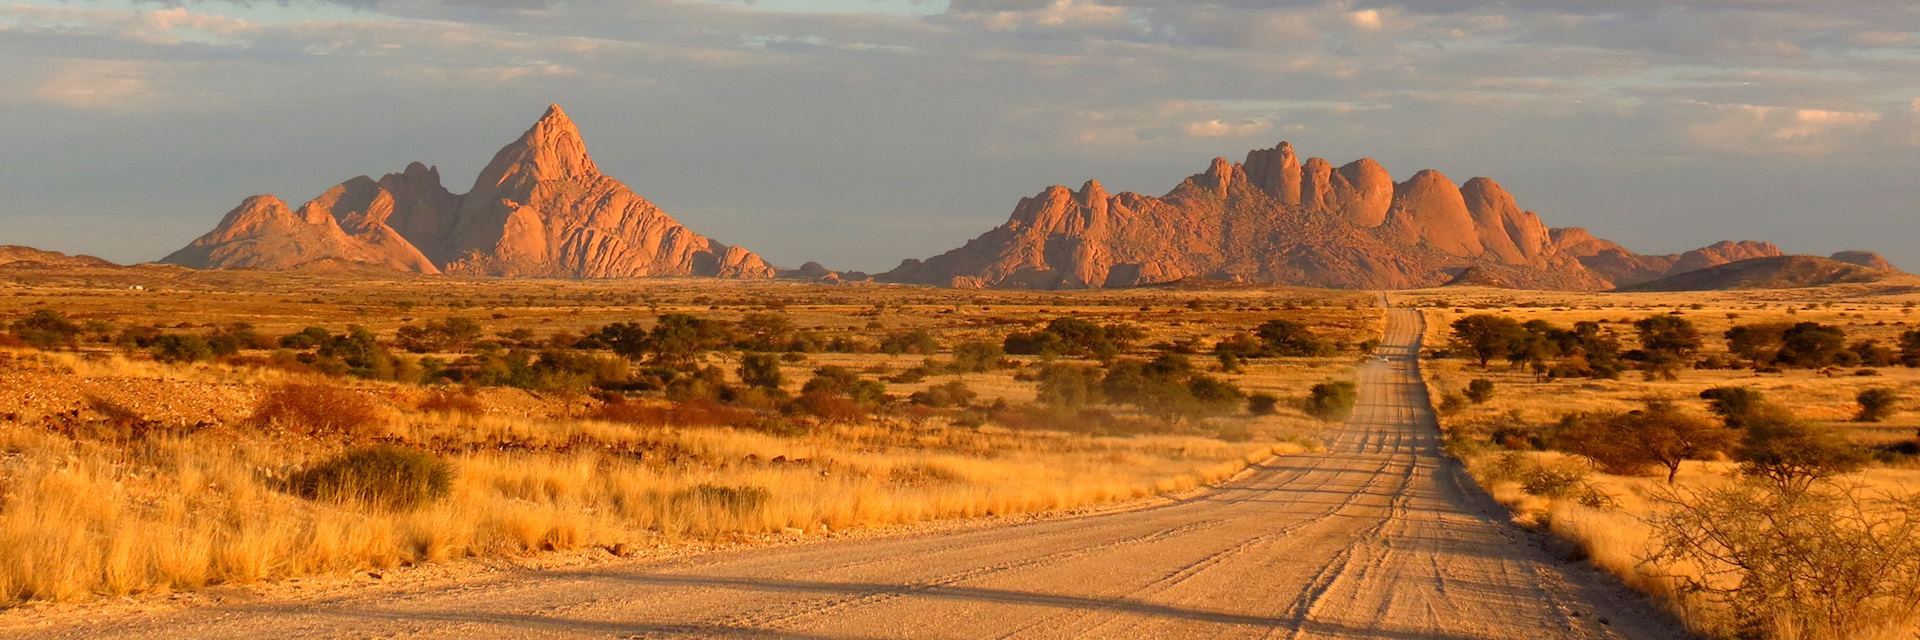 Driving in Spitzkoppe, Namibia